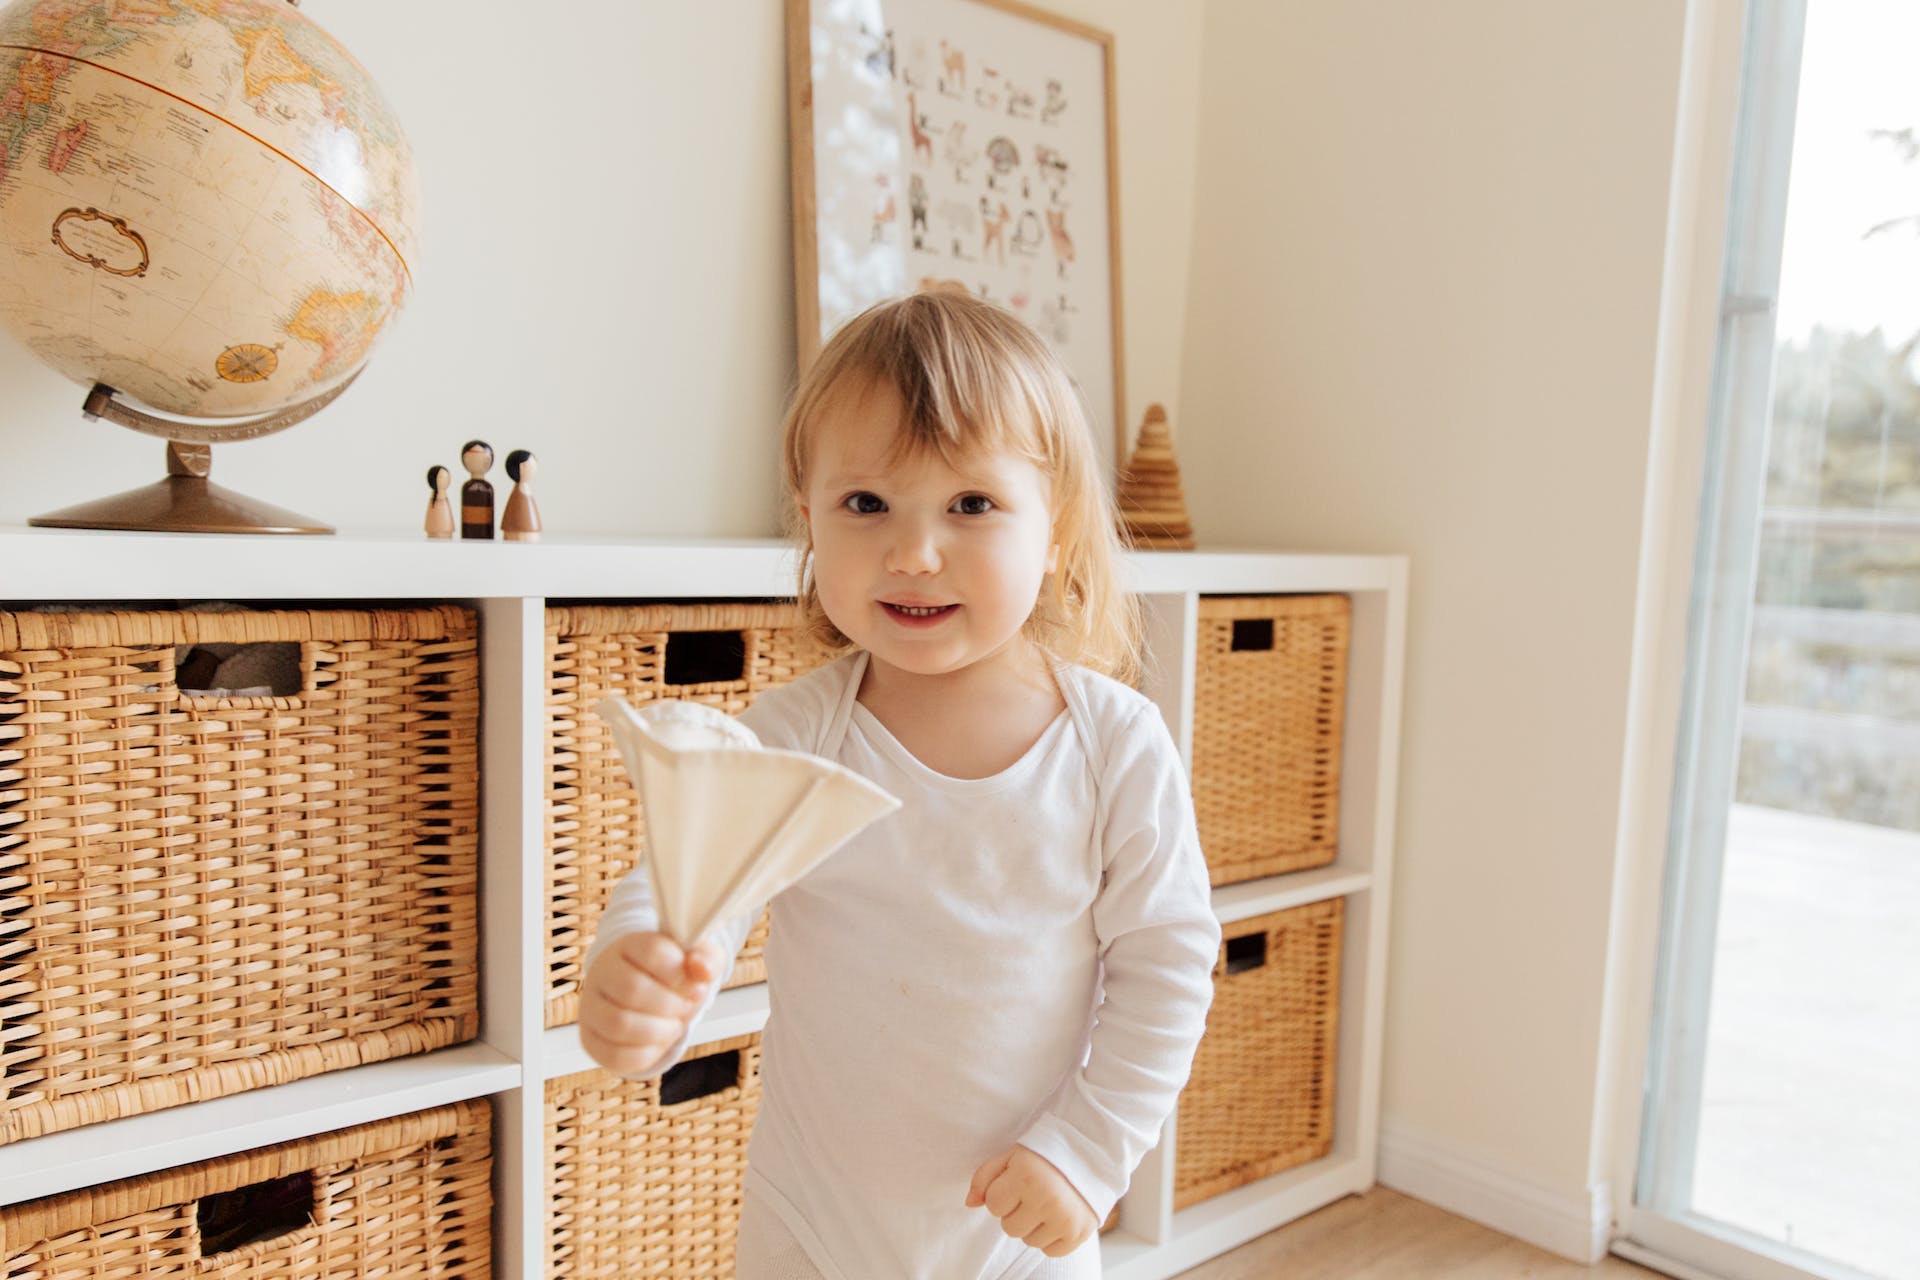 Toddler stands in front of woven storage baskets